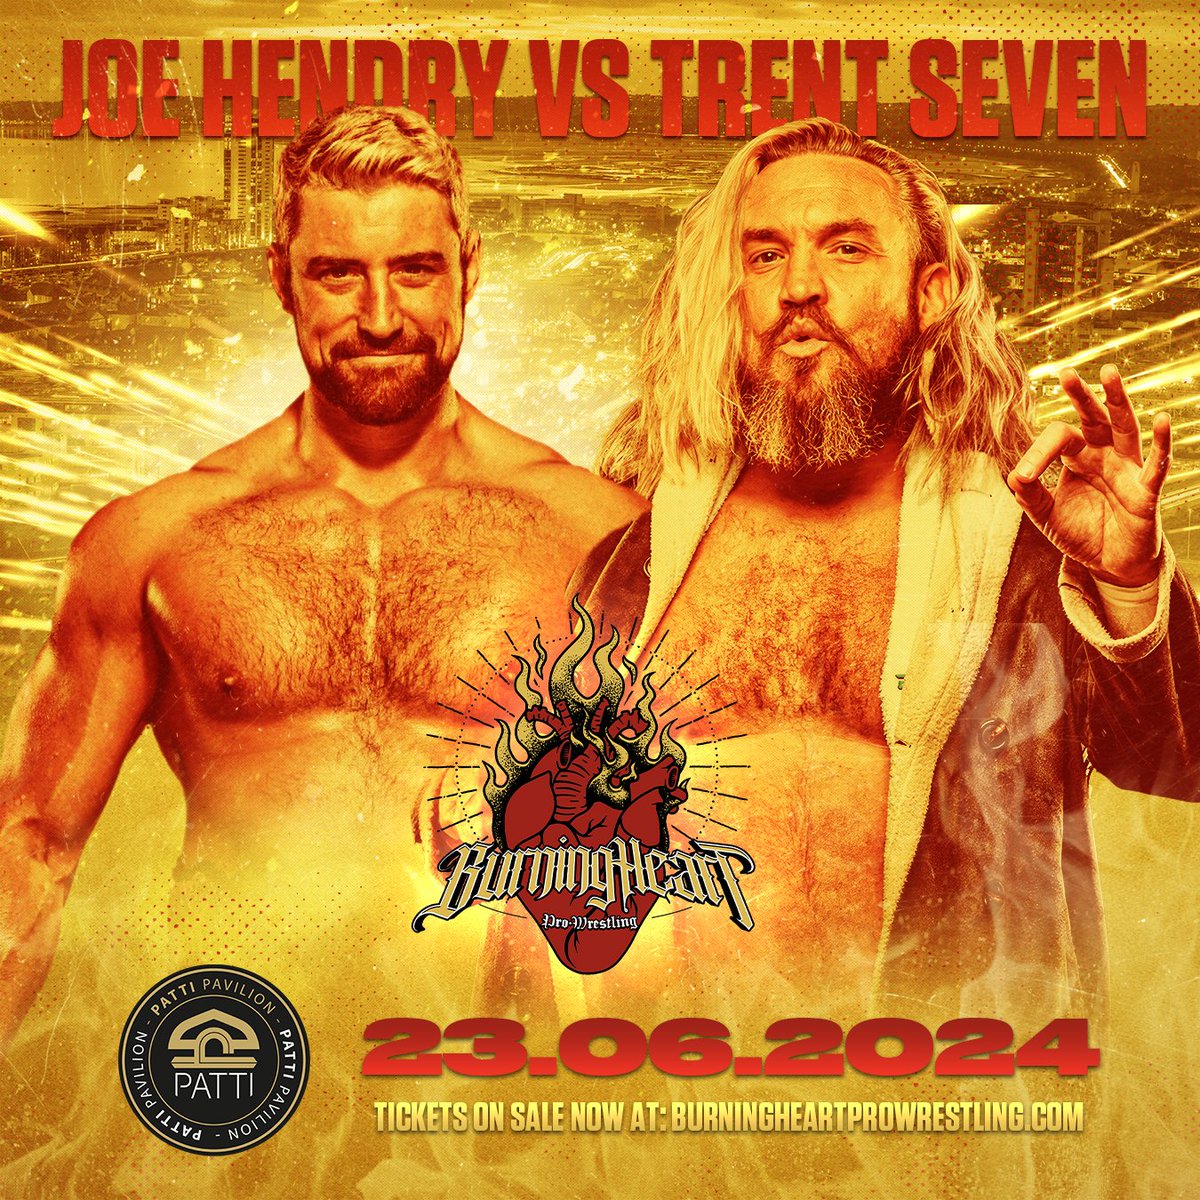 BREAKING! HENDRY vs. SEVEN in Swansea! 2 of the biggest personalities in wrestling today will collide at the Patti Pavilion in Swansea, Sunday 23rd June! Do you believe in Joe Hendry? Or would you put your money on the pioneer of British Strong Style? Link to tickets in bio 🎟